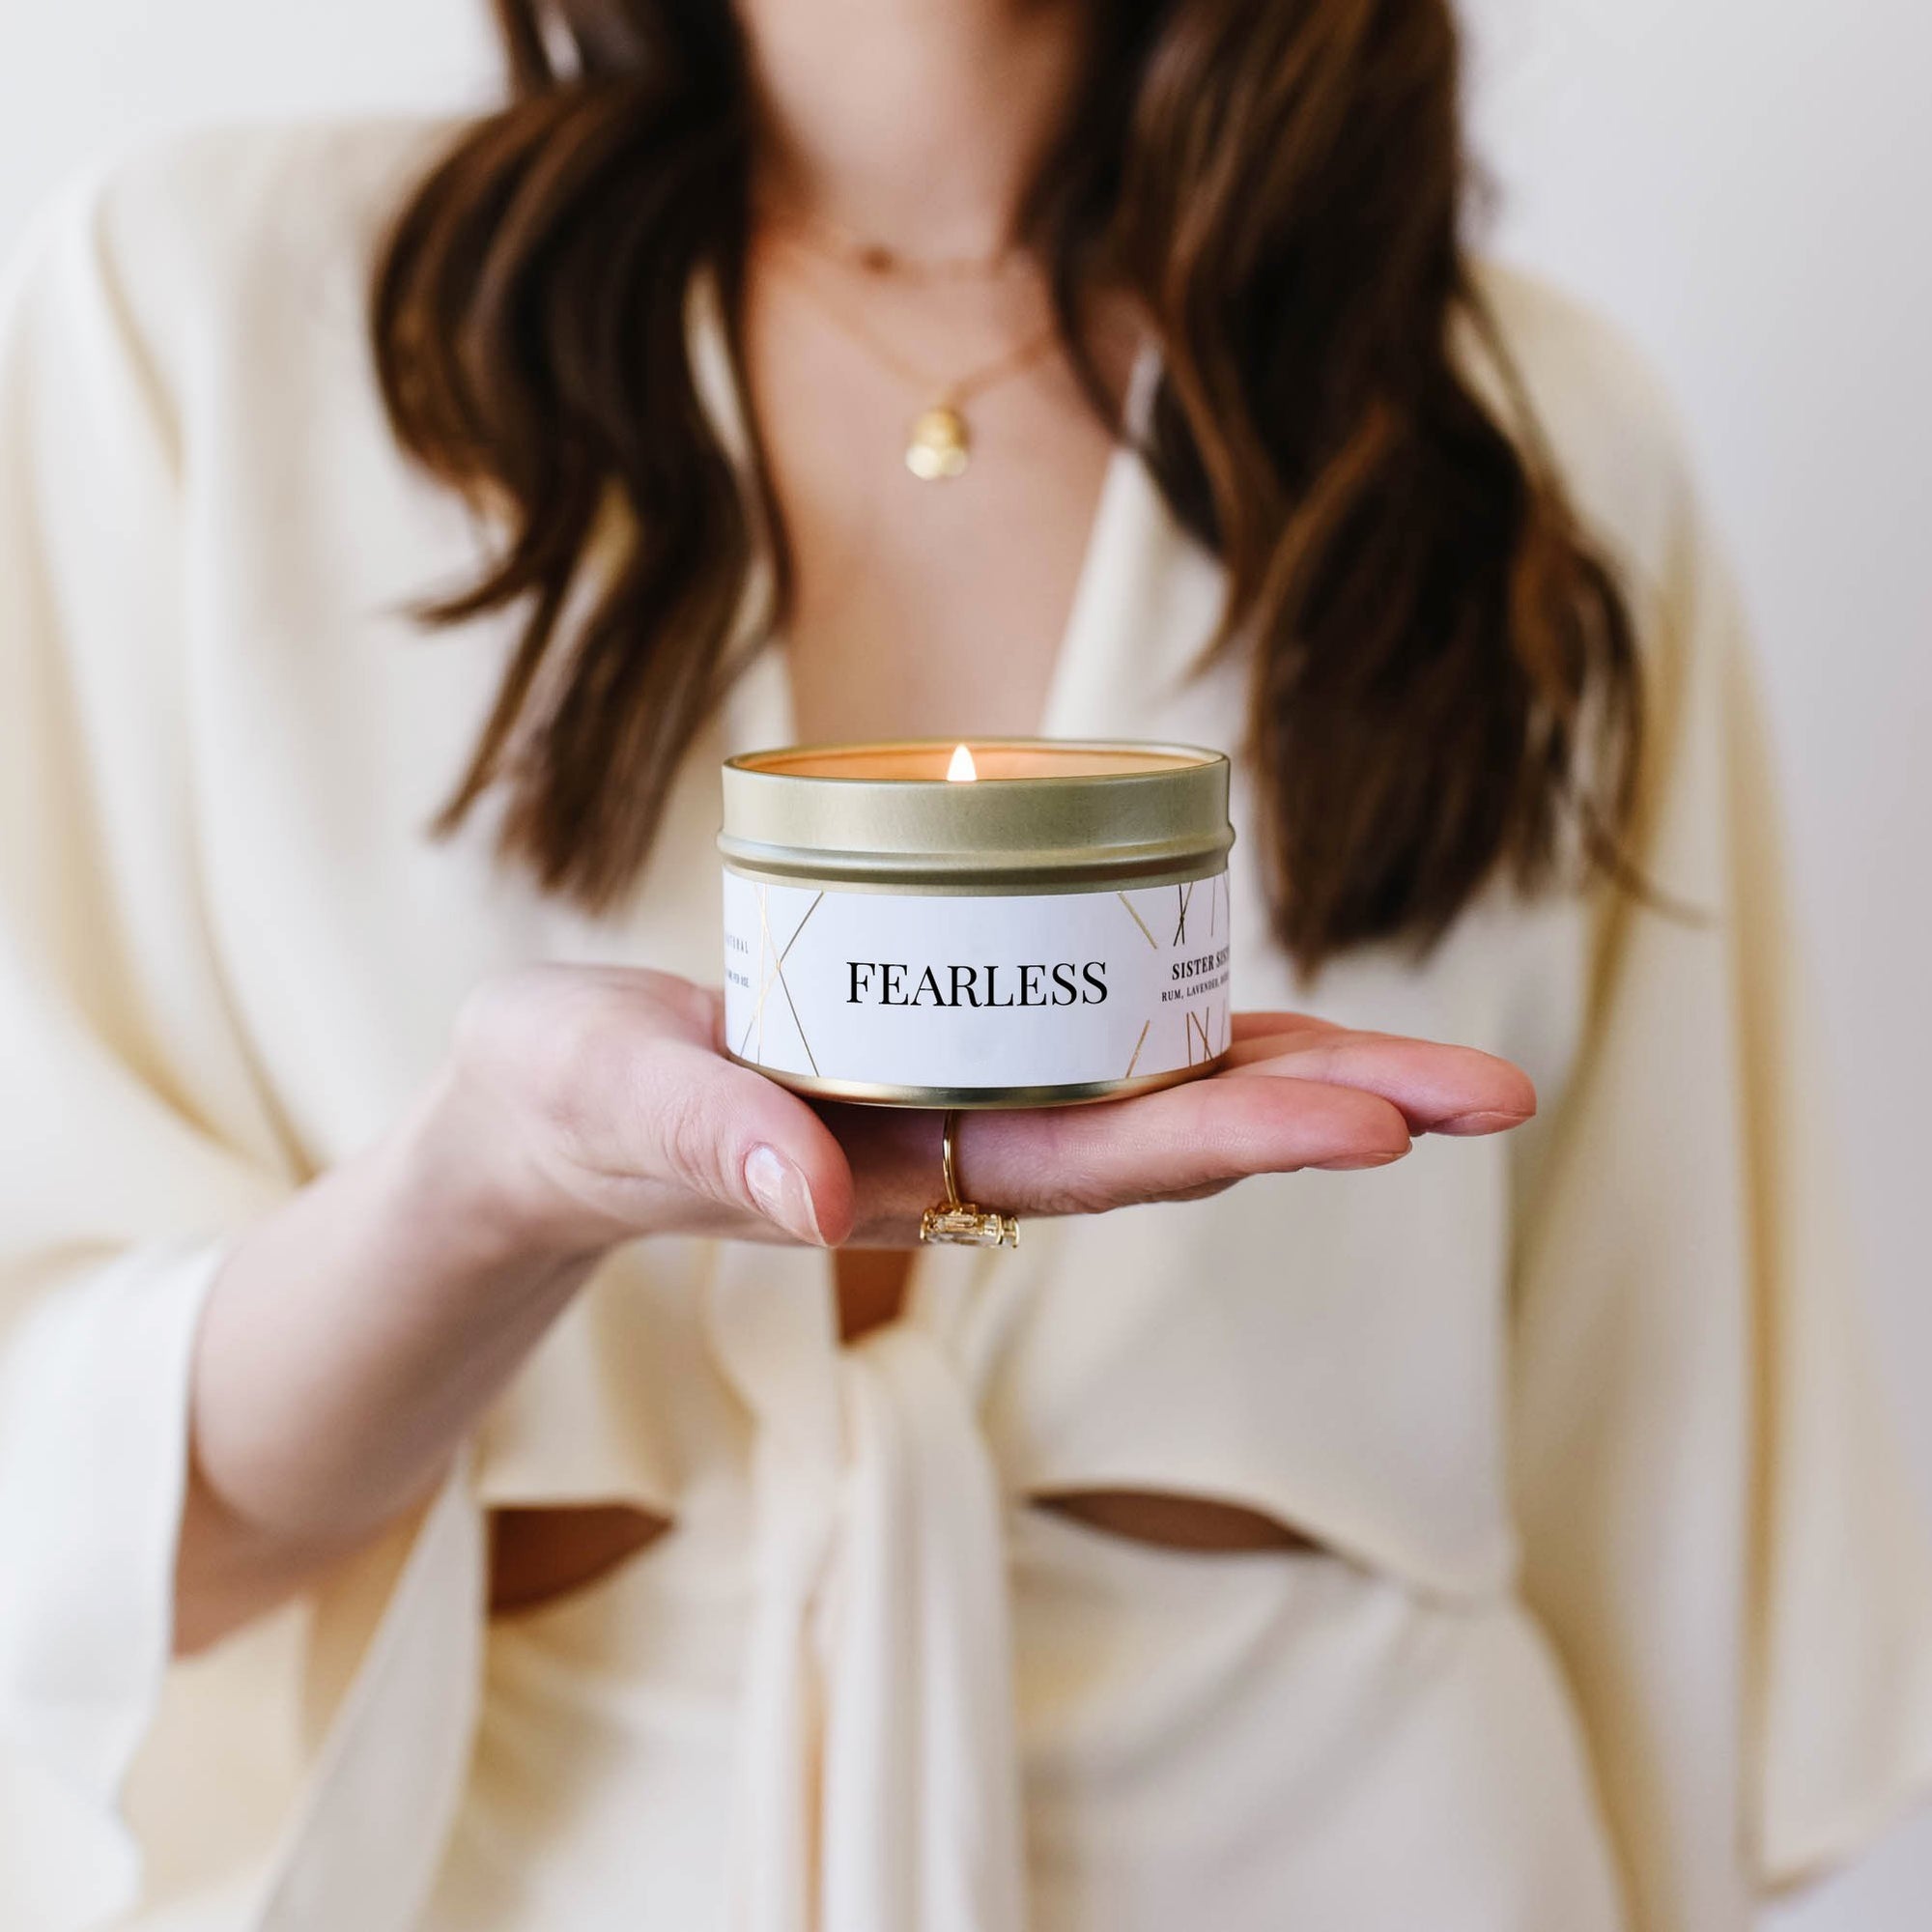 Fearless Namesake Candle - SO PRETTY CARA COTTER